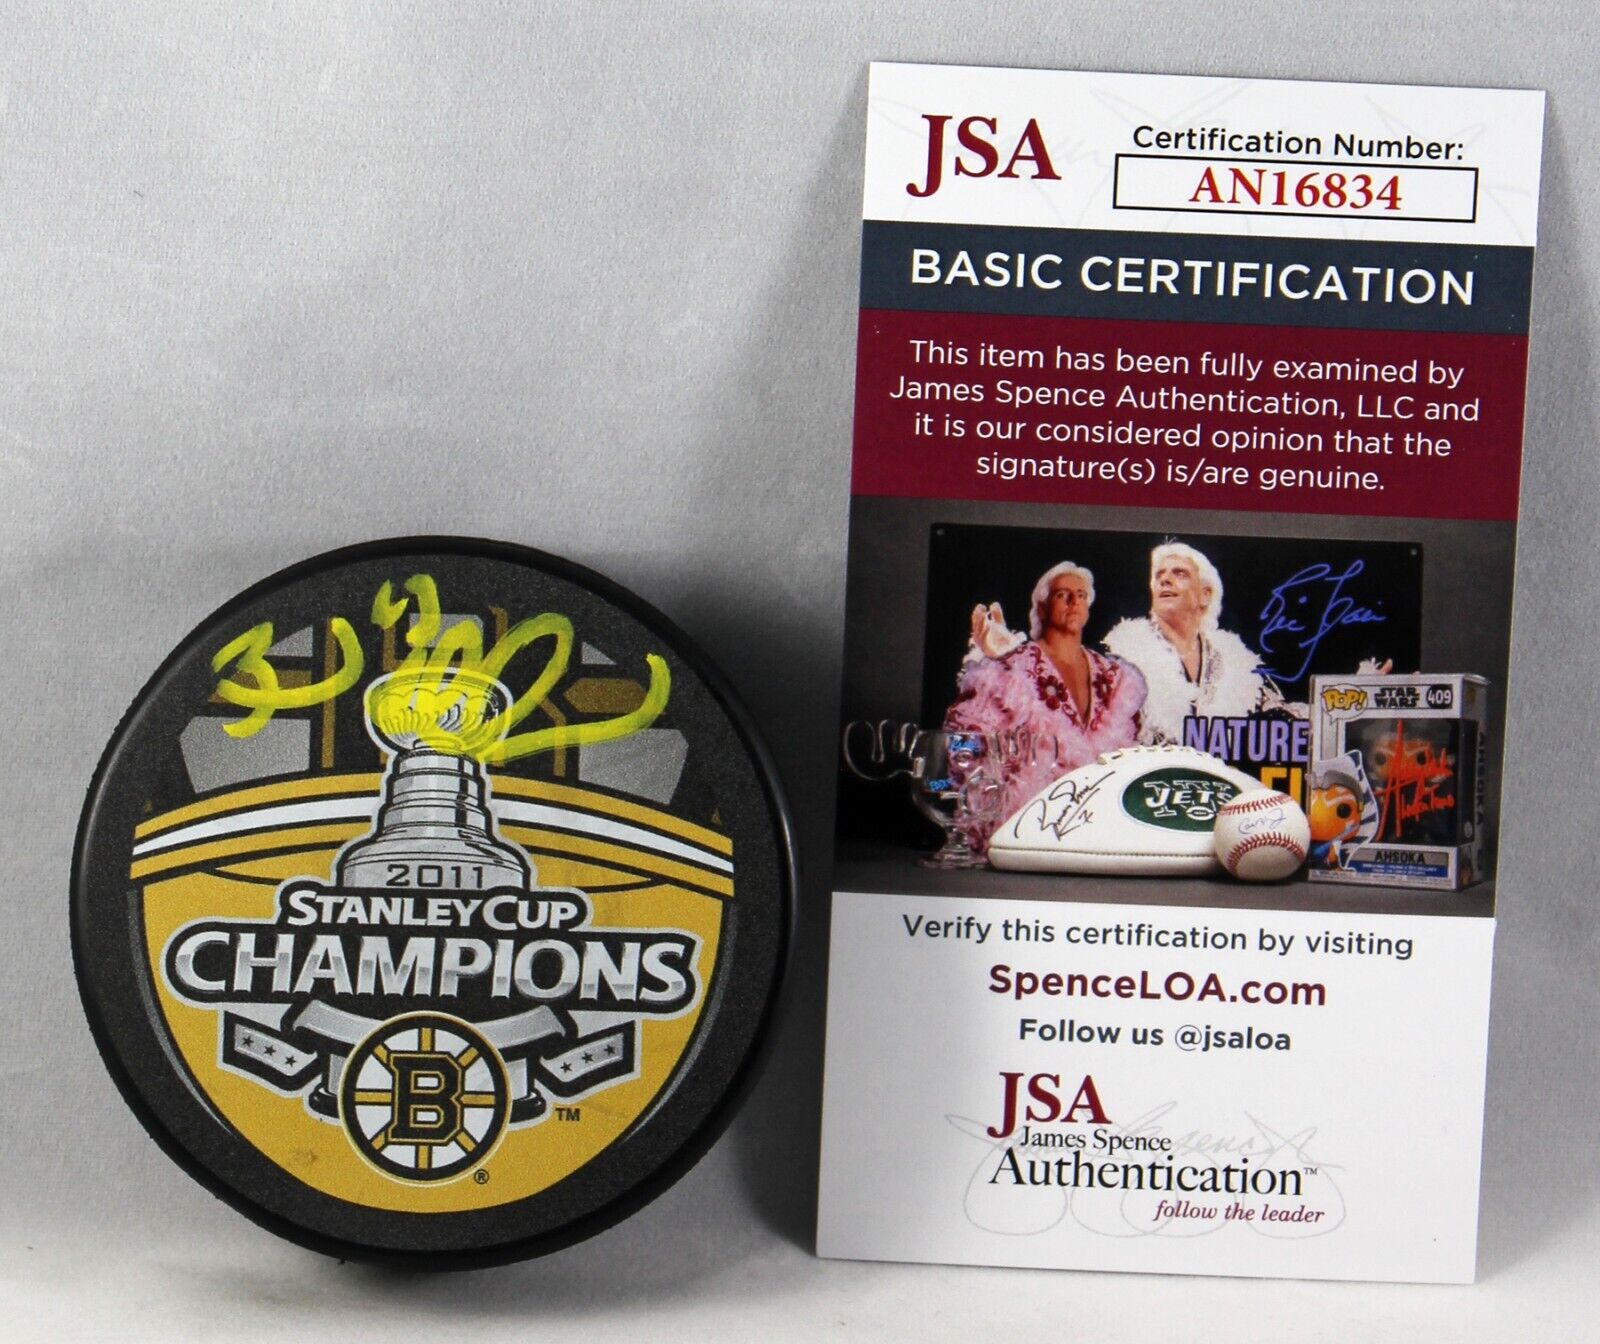 BRAD MARCHAND SIGNED 2011 STANLEY CUP CHAMPIONS Puck BOSTON BRUINS AUTO +JSA COA